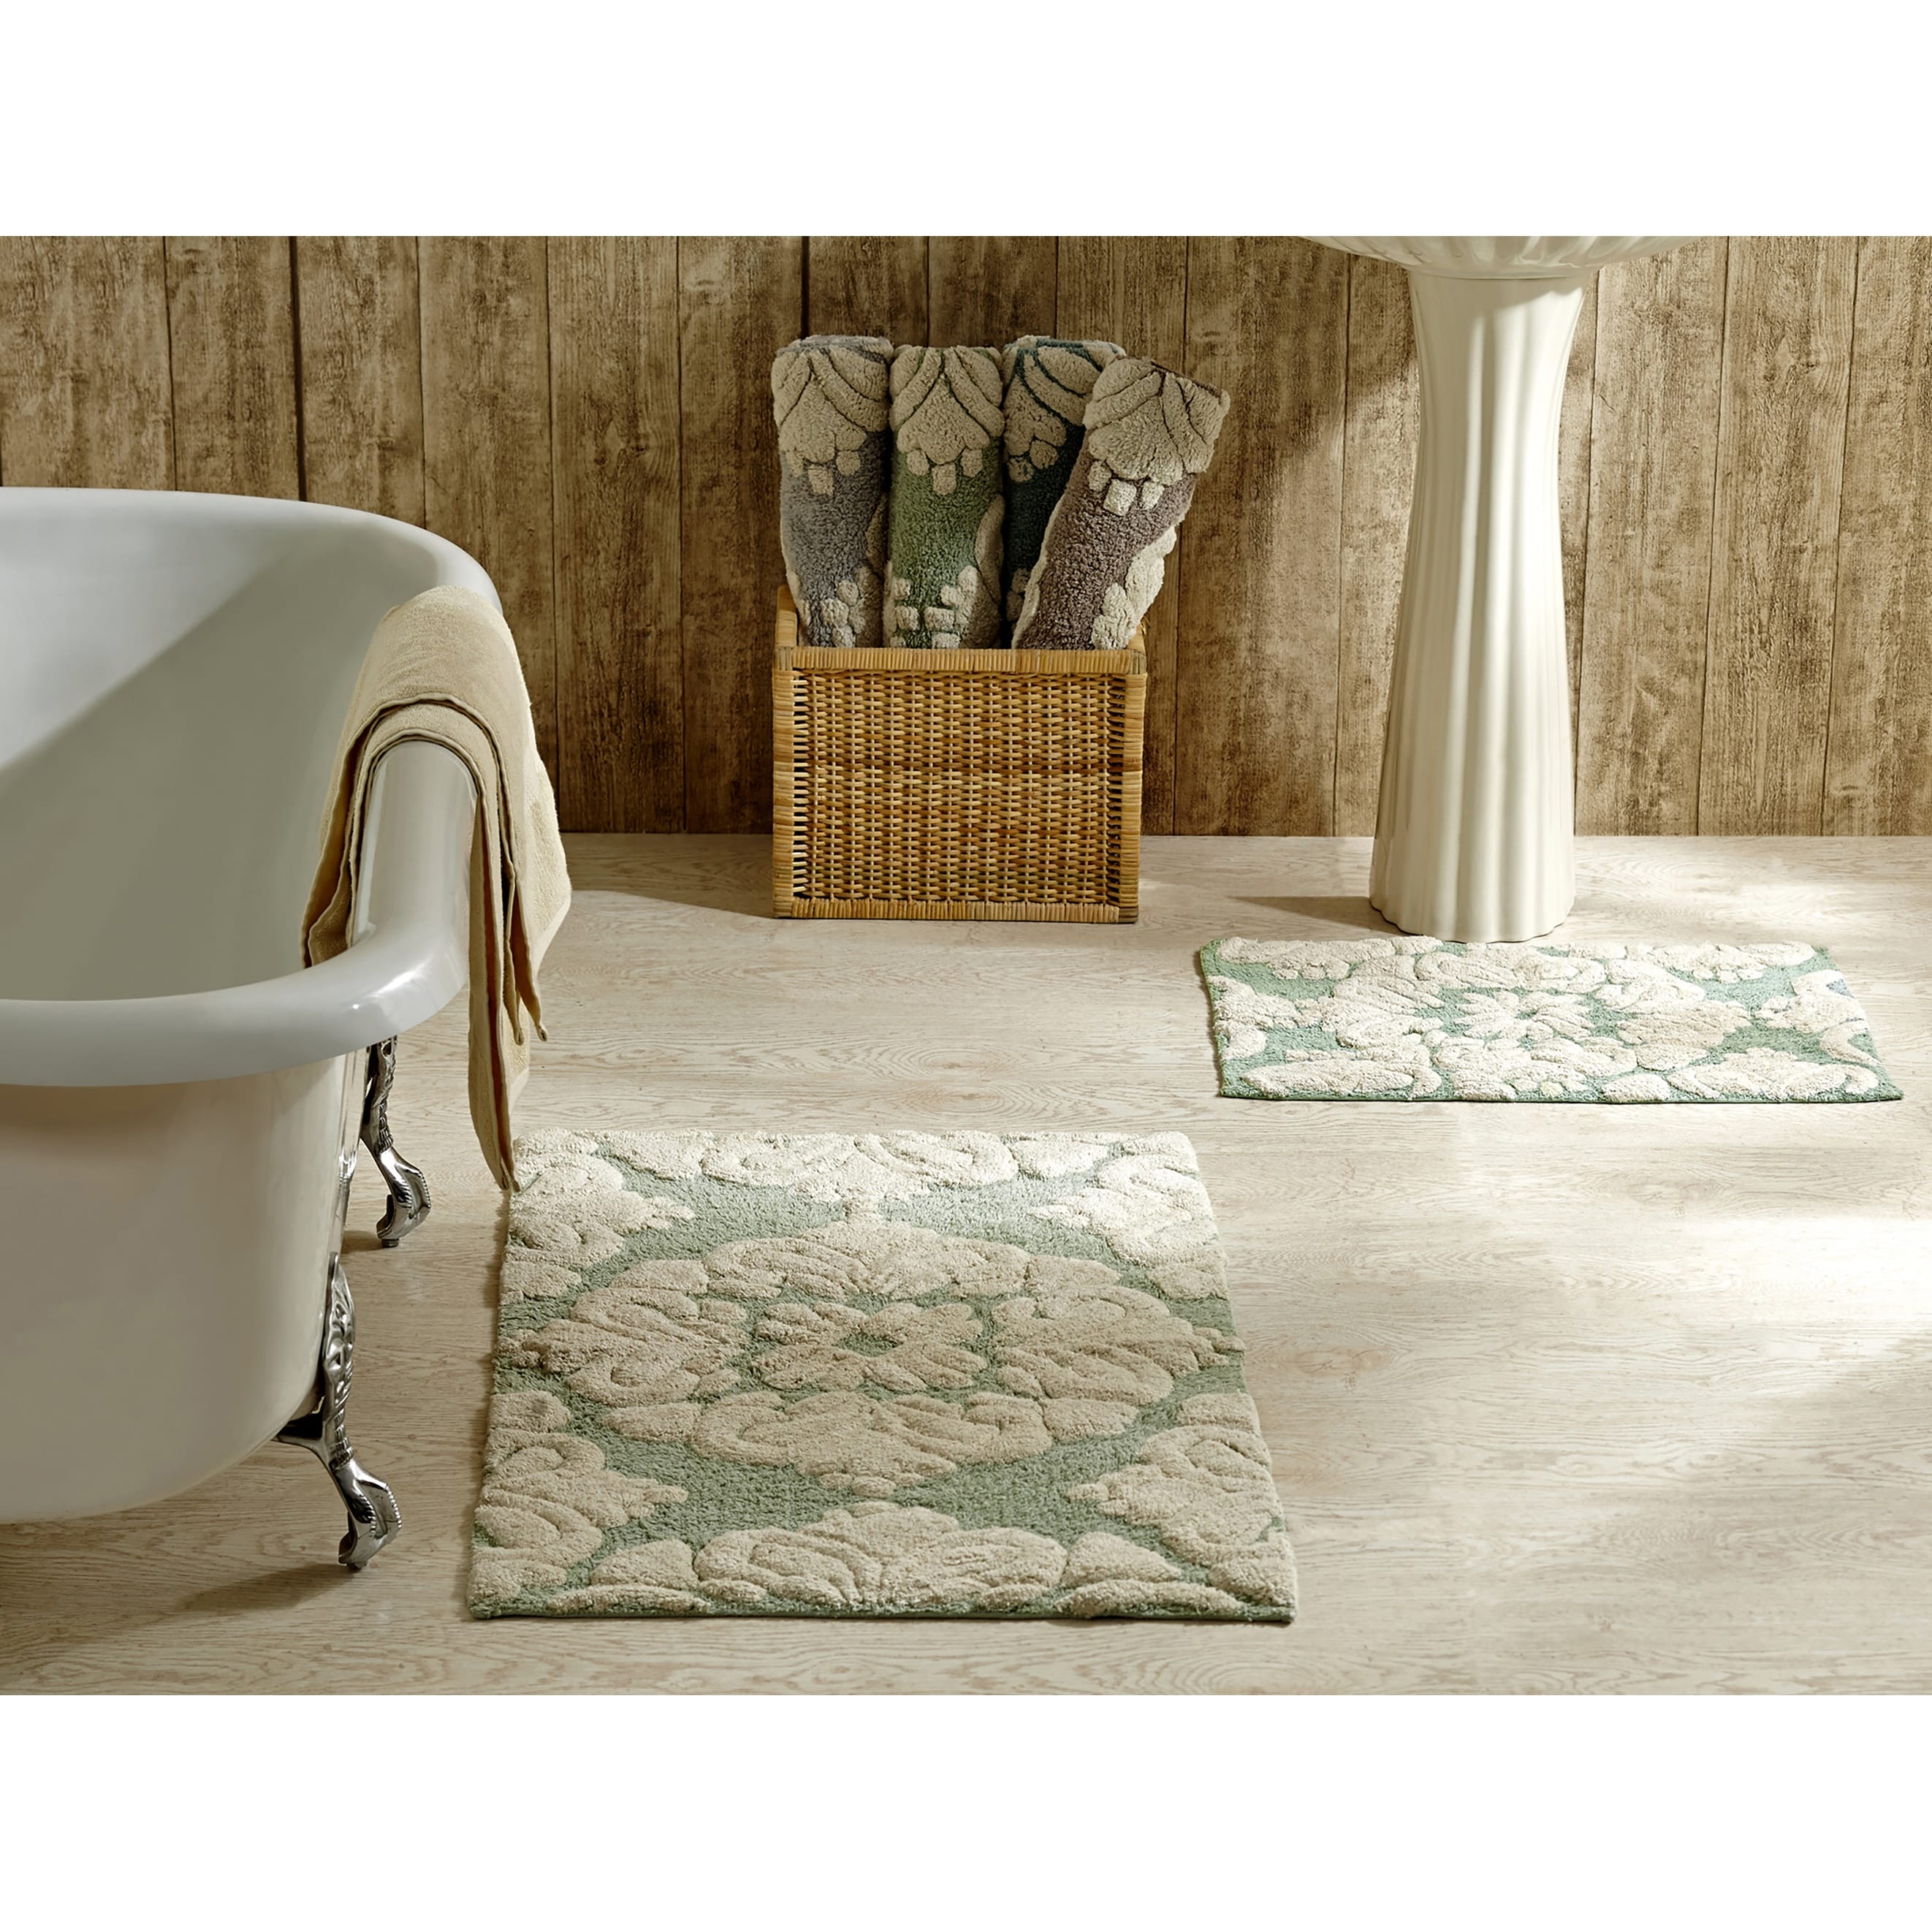 https://ak1.ostkcdn.com/images/products/is/images/direct/9f0cb6fea35a28cff318812b4206c8248e92eceb/Better-Trends-Medallion-Tufted-Bath-Mat-Rug-100%25-Cotton.jpg